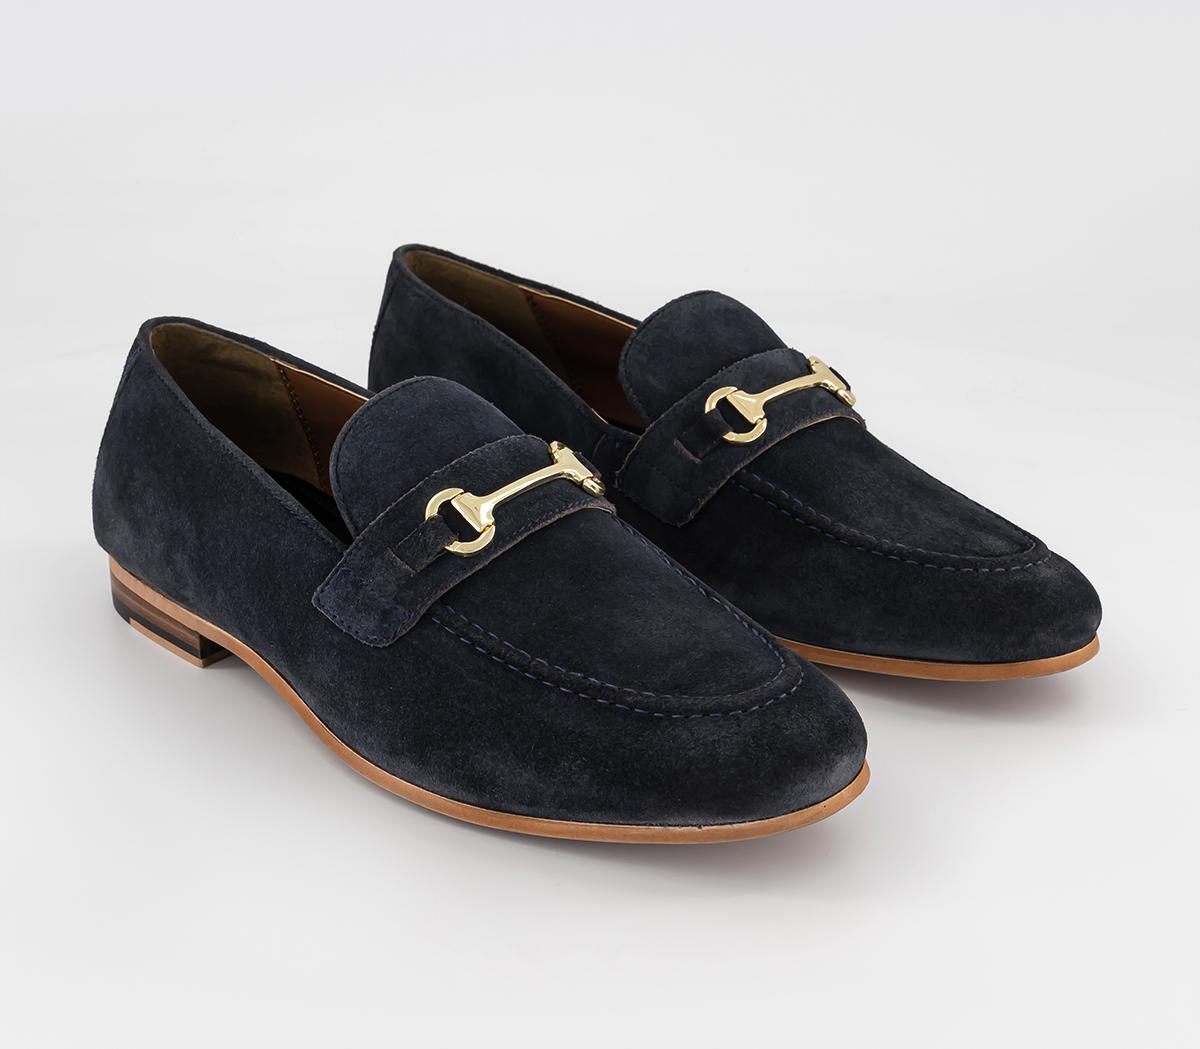 Walk London Mens Terry Trim Loafers Navy Suede, 8